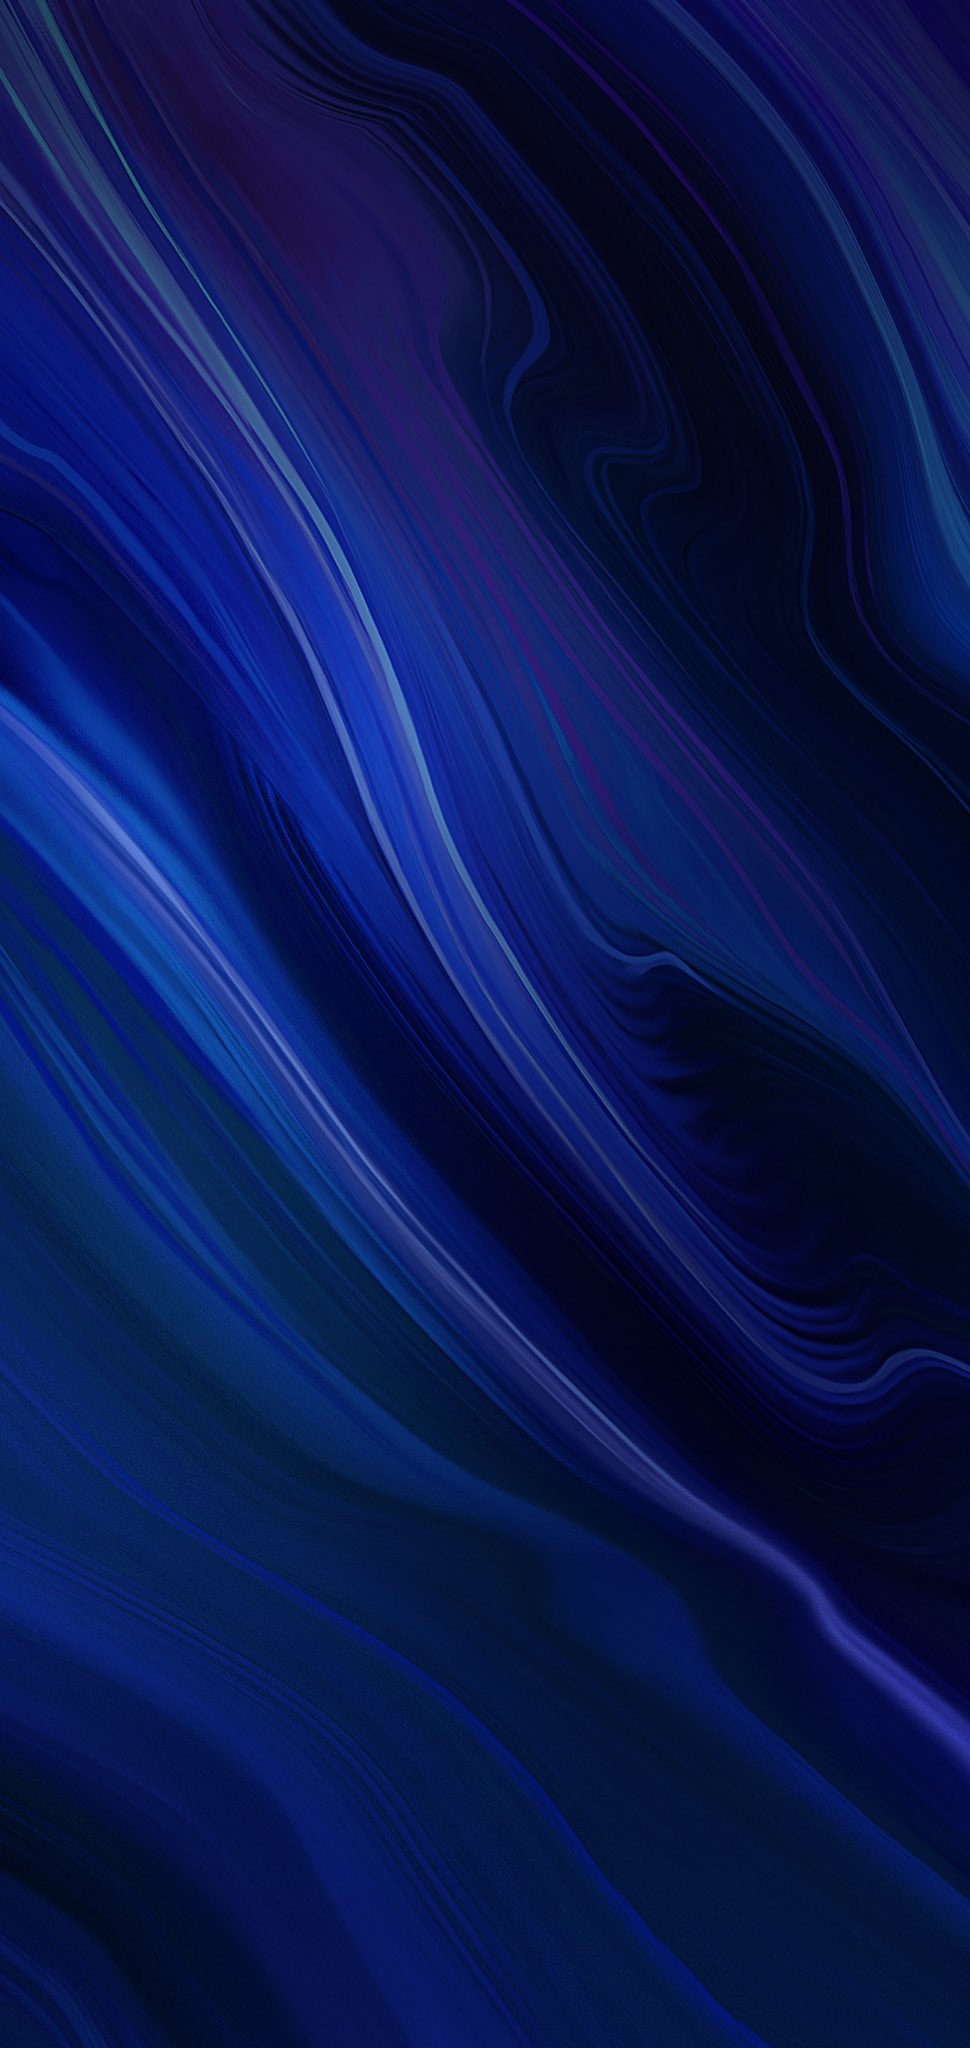 Download these blue wallpaper for iPhone, iPad